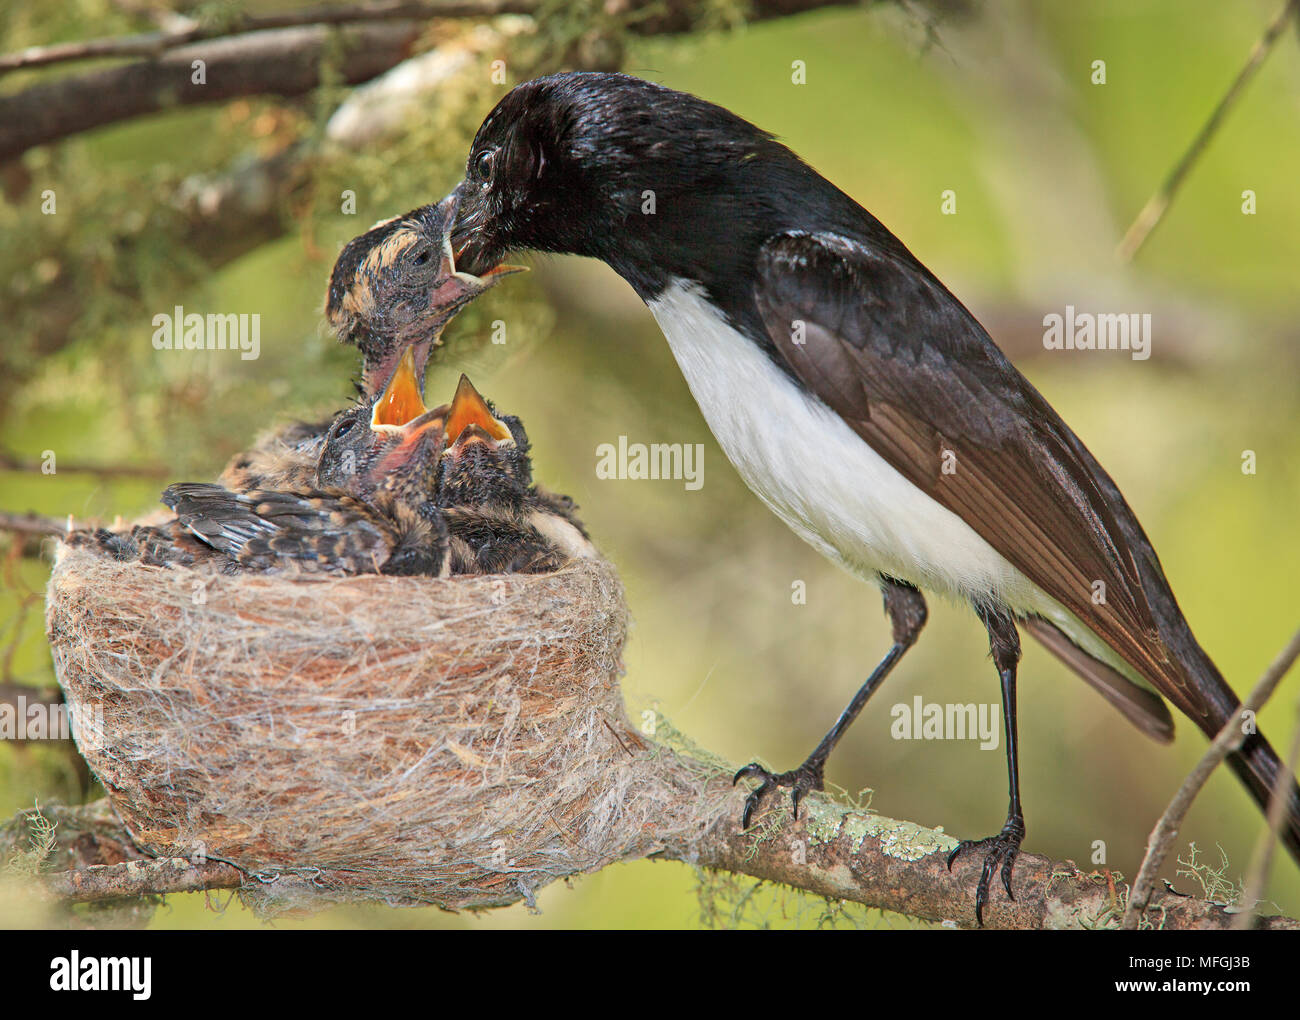 Willie Wagtail (Rhipidura leucophrys), Fam. Dicruridae, Oxley Wild River National Park, New South Wales, Australia Stock Photo